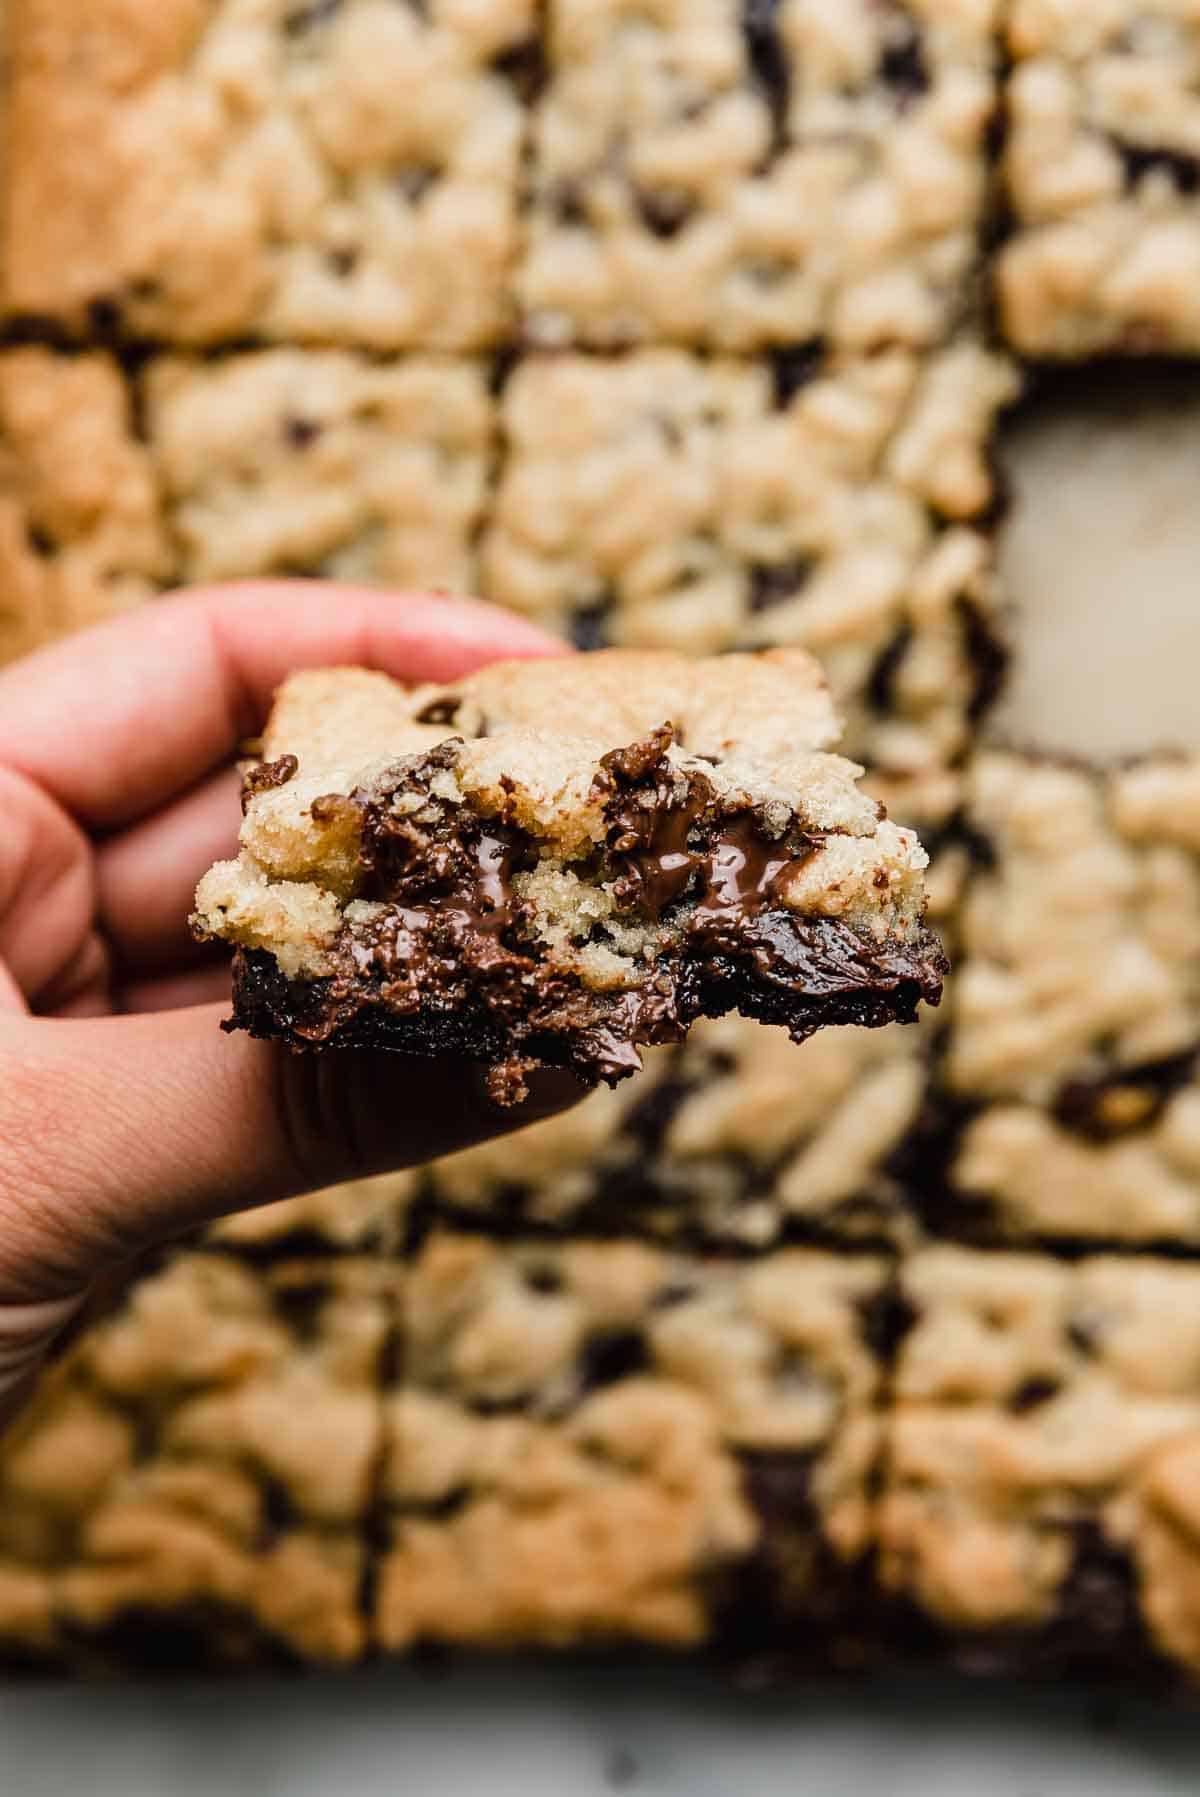 A hand holding a Brookie (chocolate chip brownie bar).